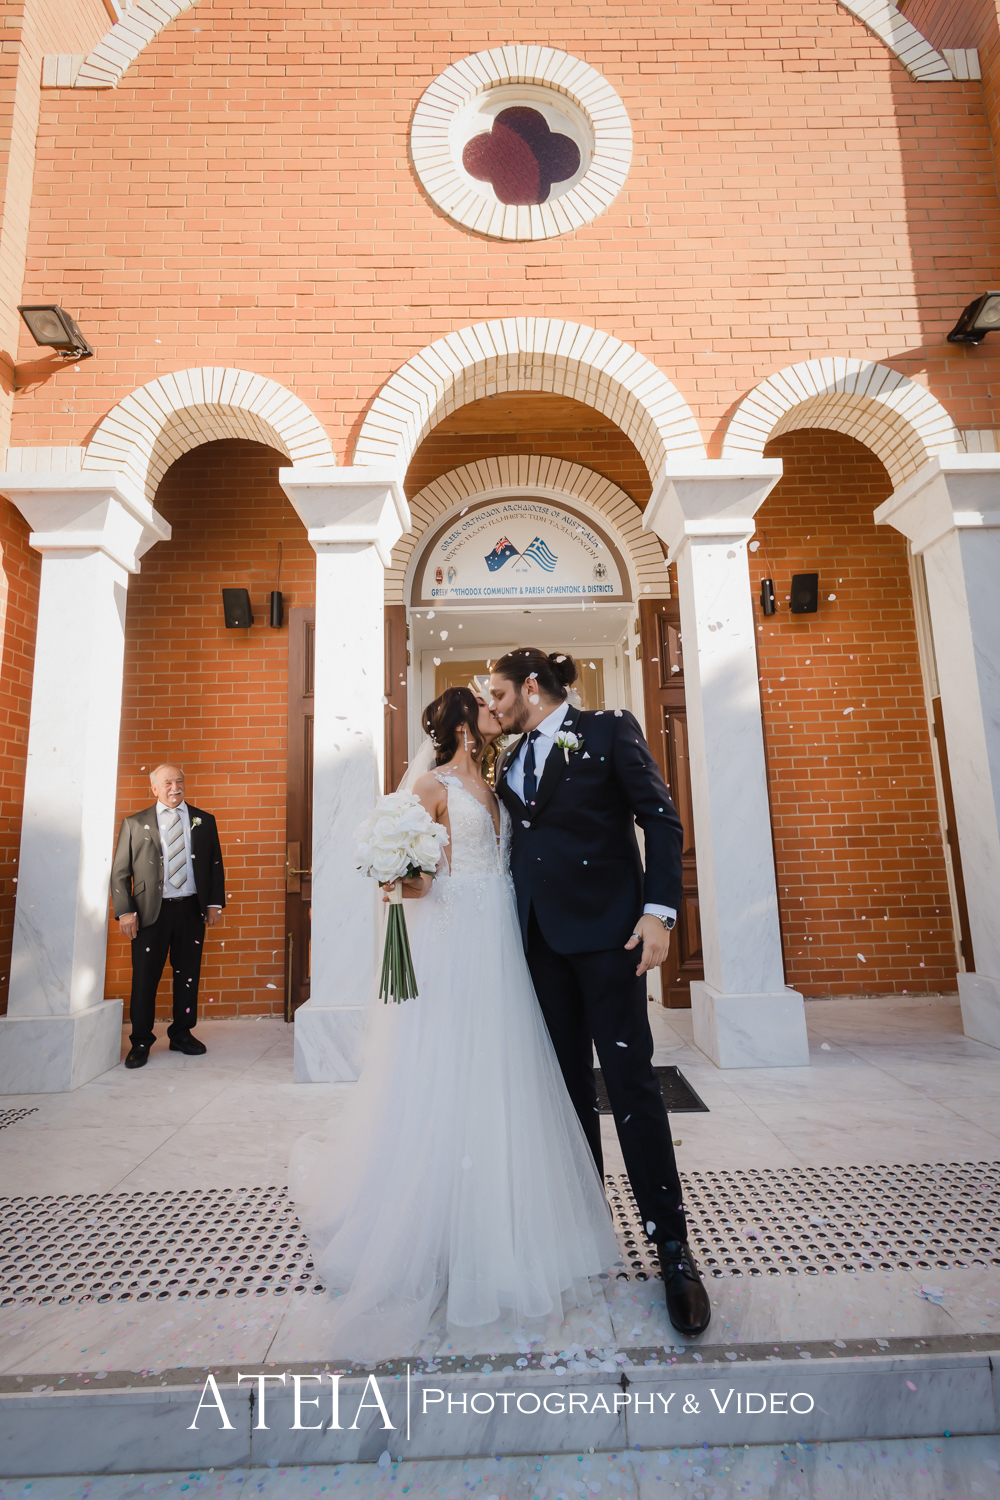 , Anthia and Petros&#8217; wedding at Alencia Receptions captured by ATEIA Photography &#038; Video